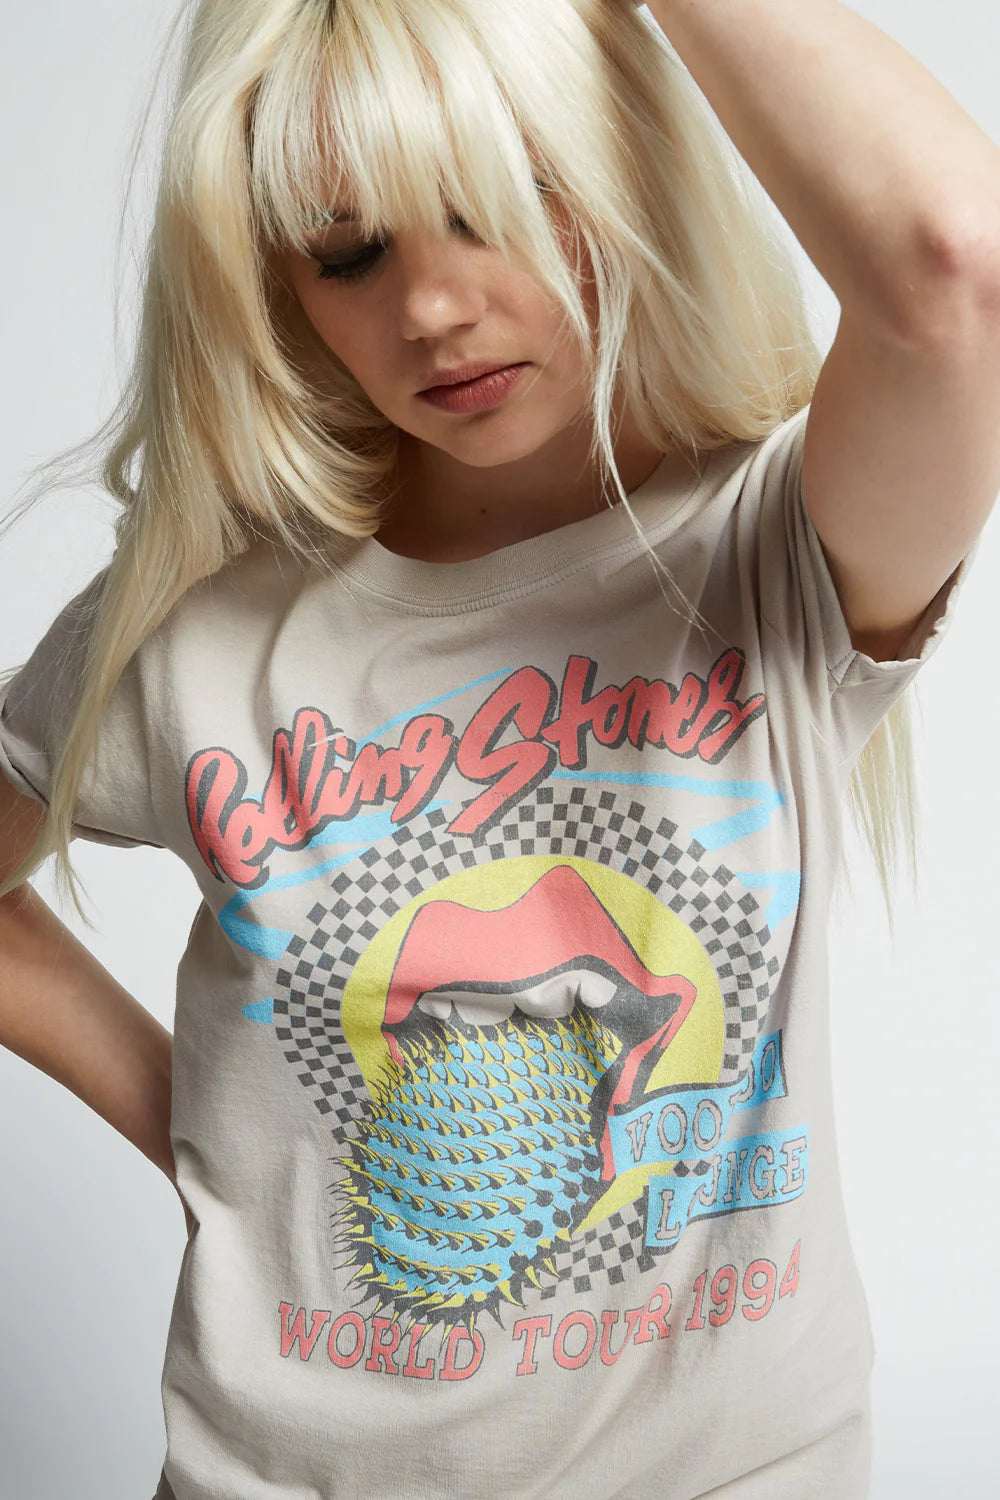 Recycled Karma The Rolling Stone Voodoo Lounge Tee